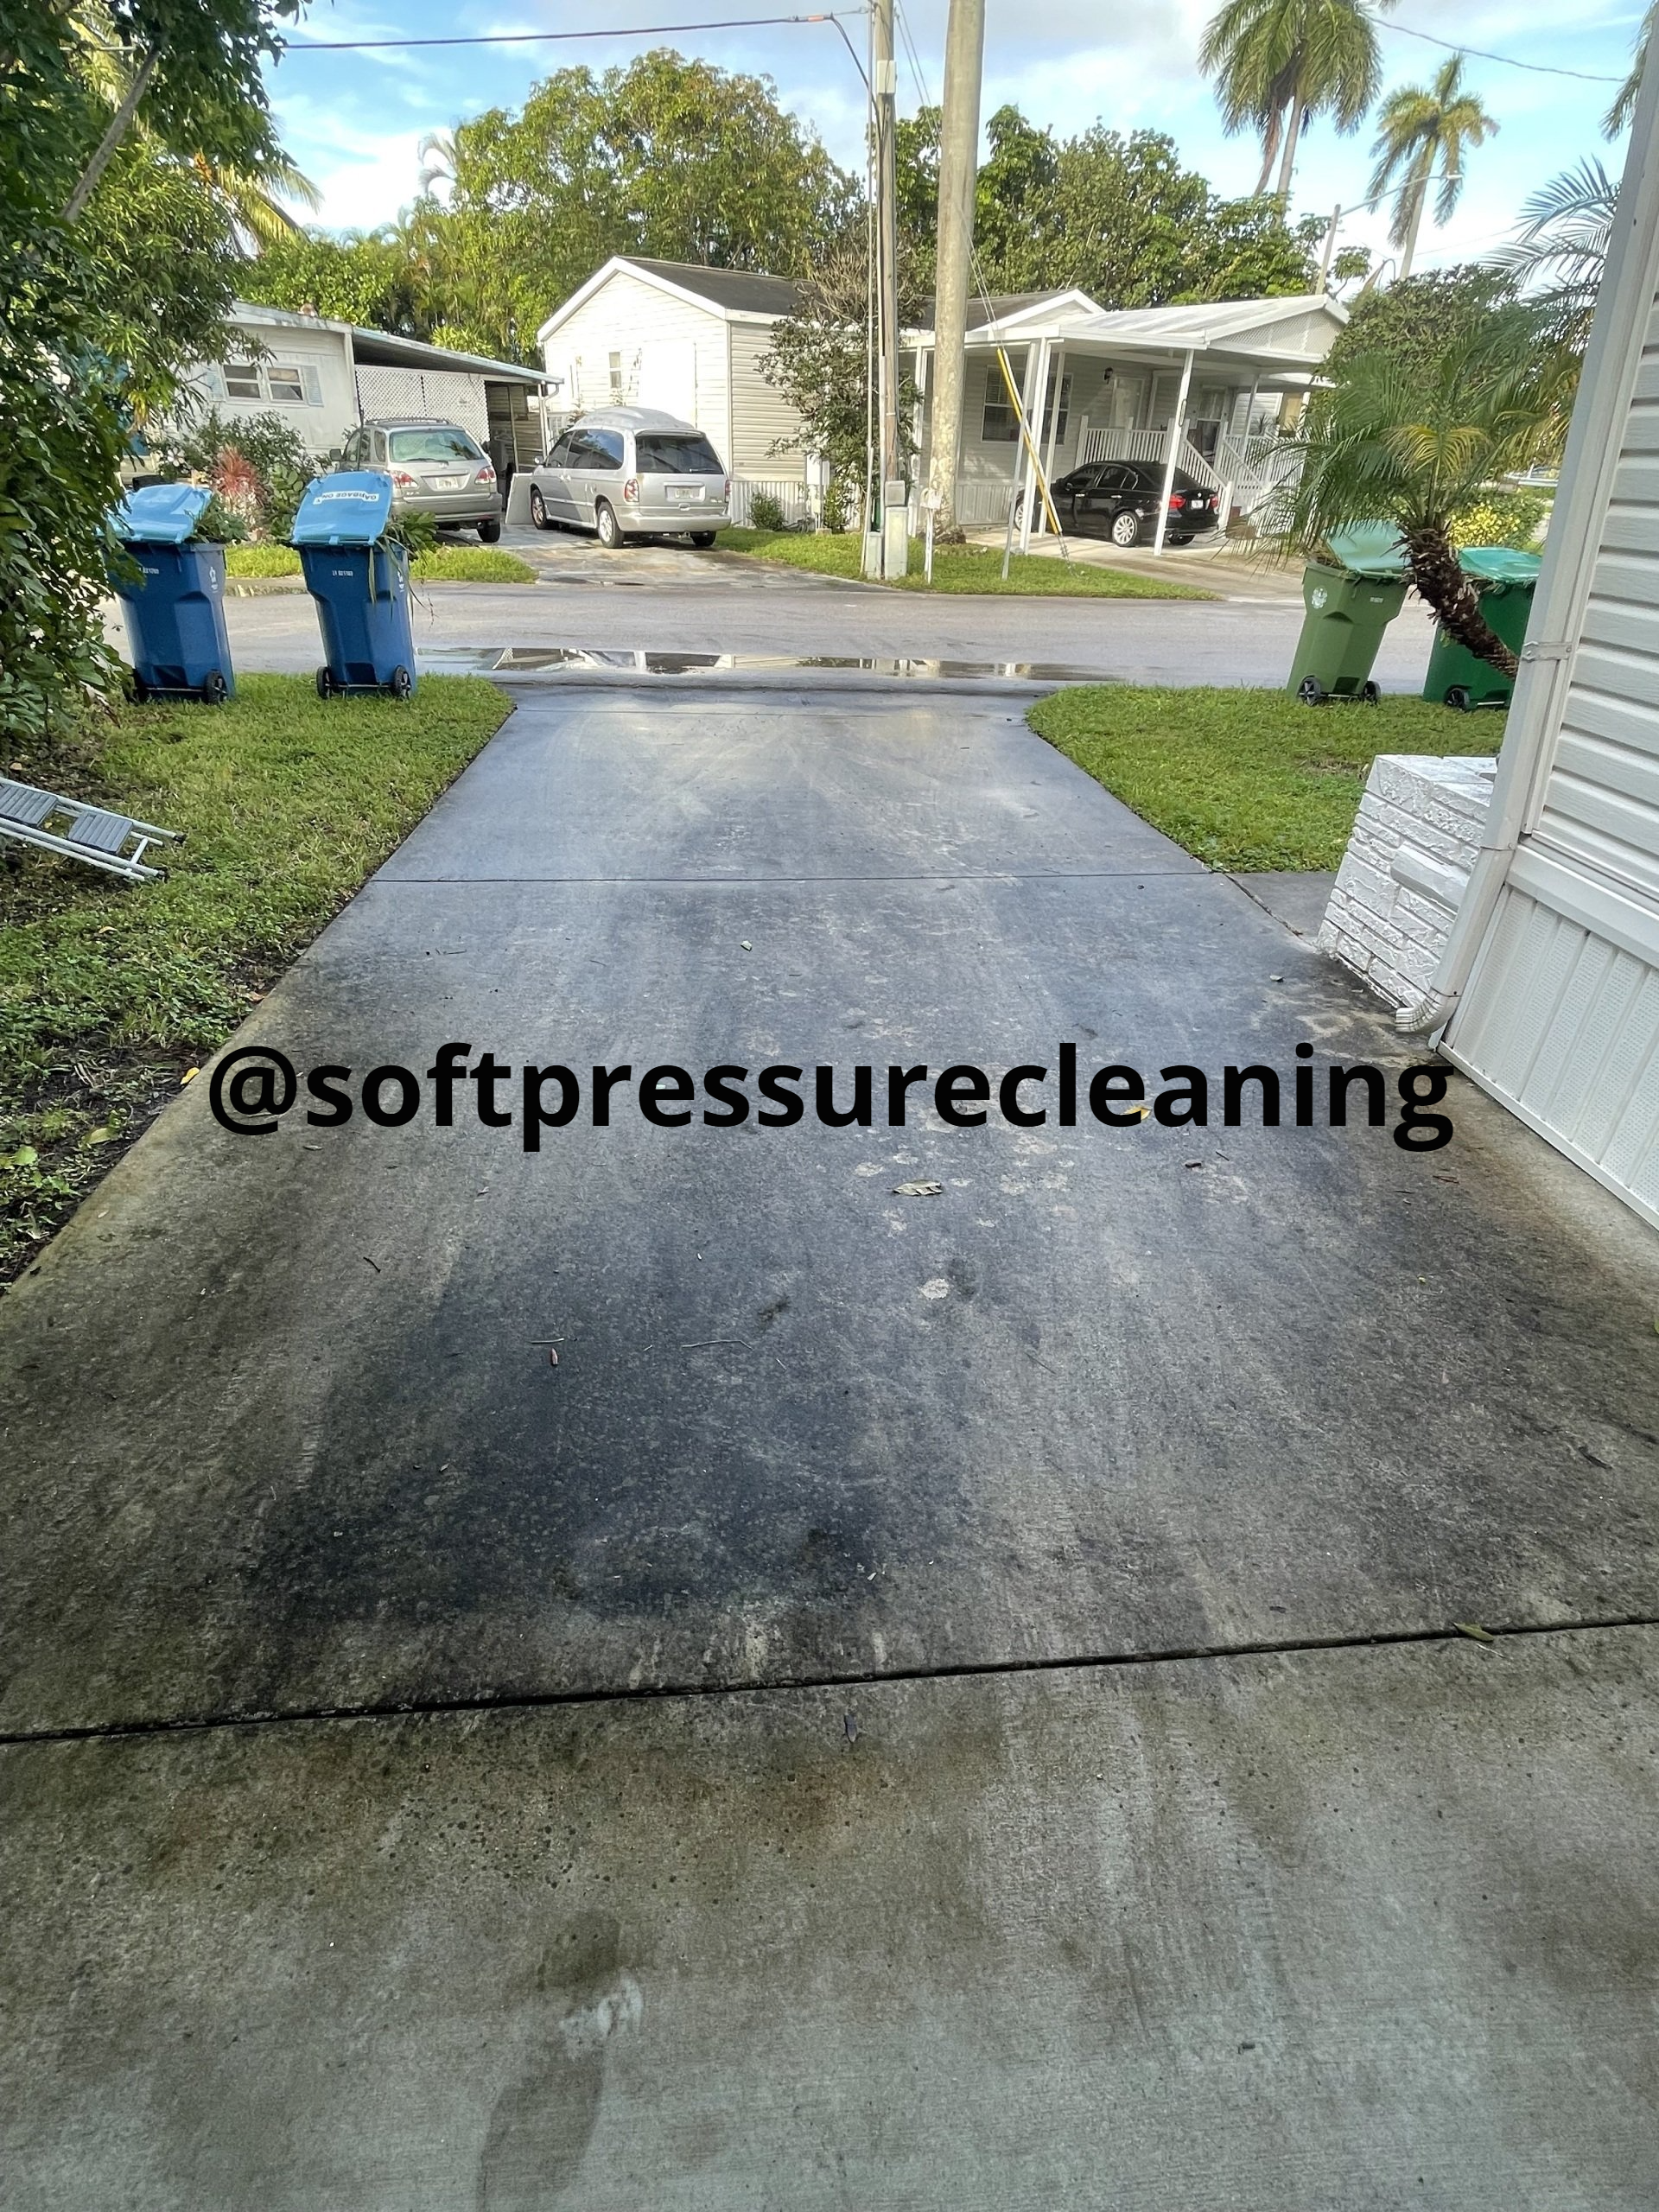 Before and after driveway cleaning showing improved curb appeal and cleanliness.